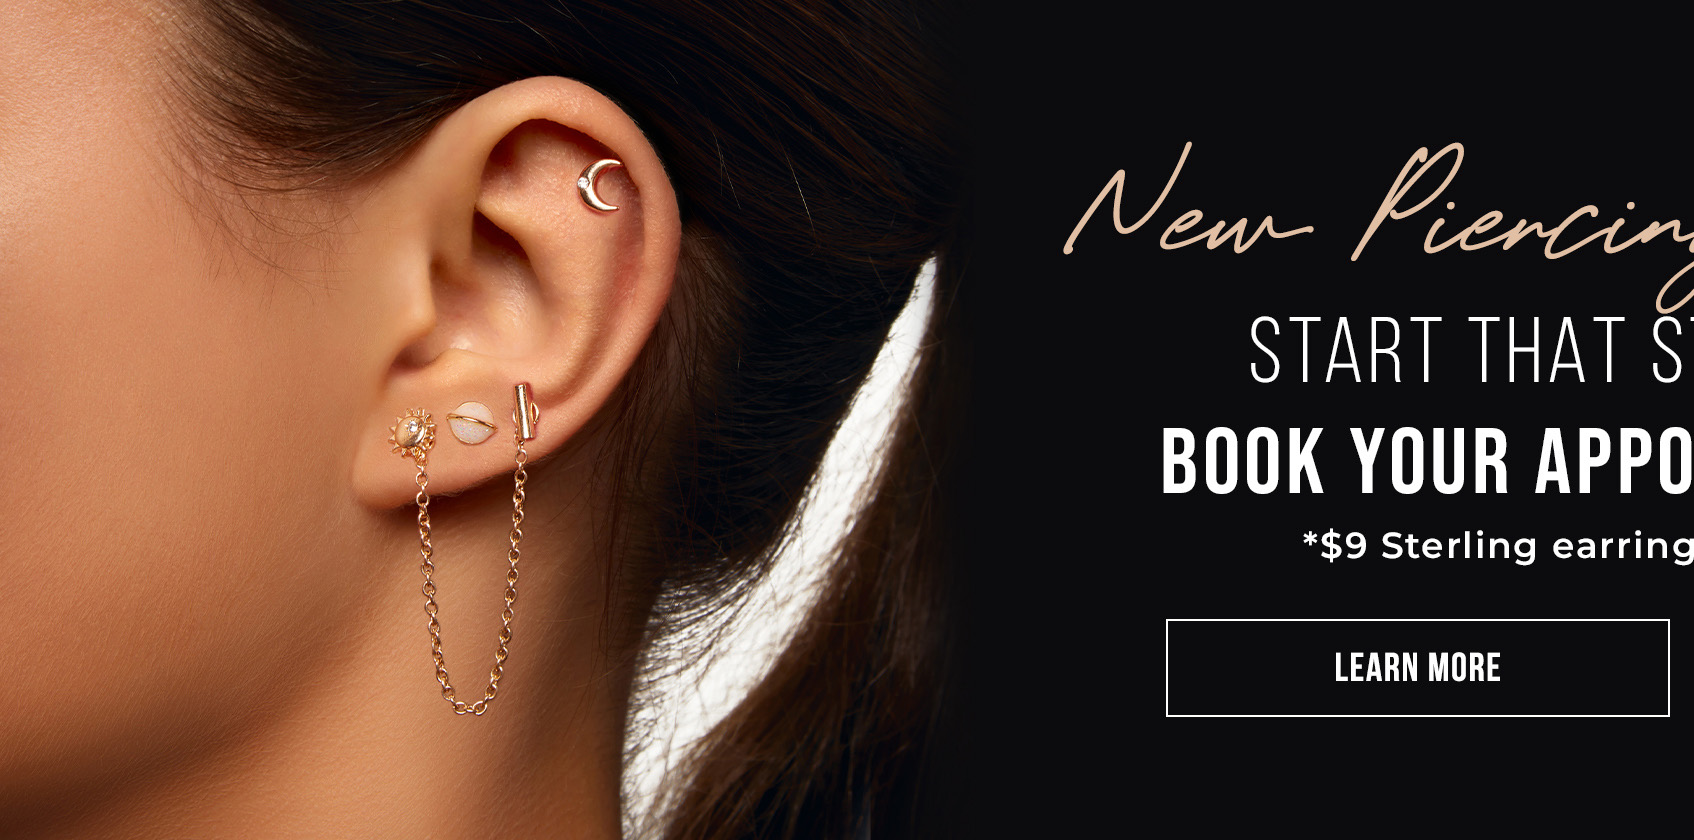 New Piercing, You Say? Learn More